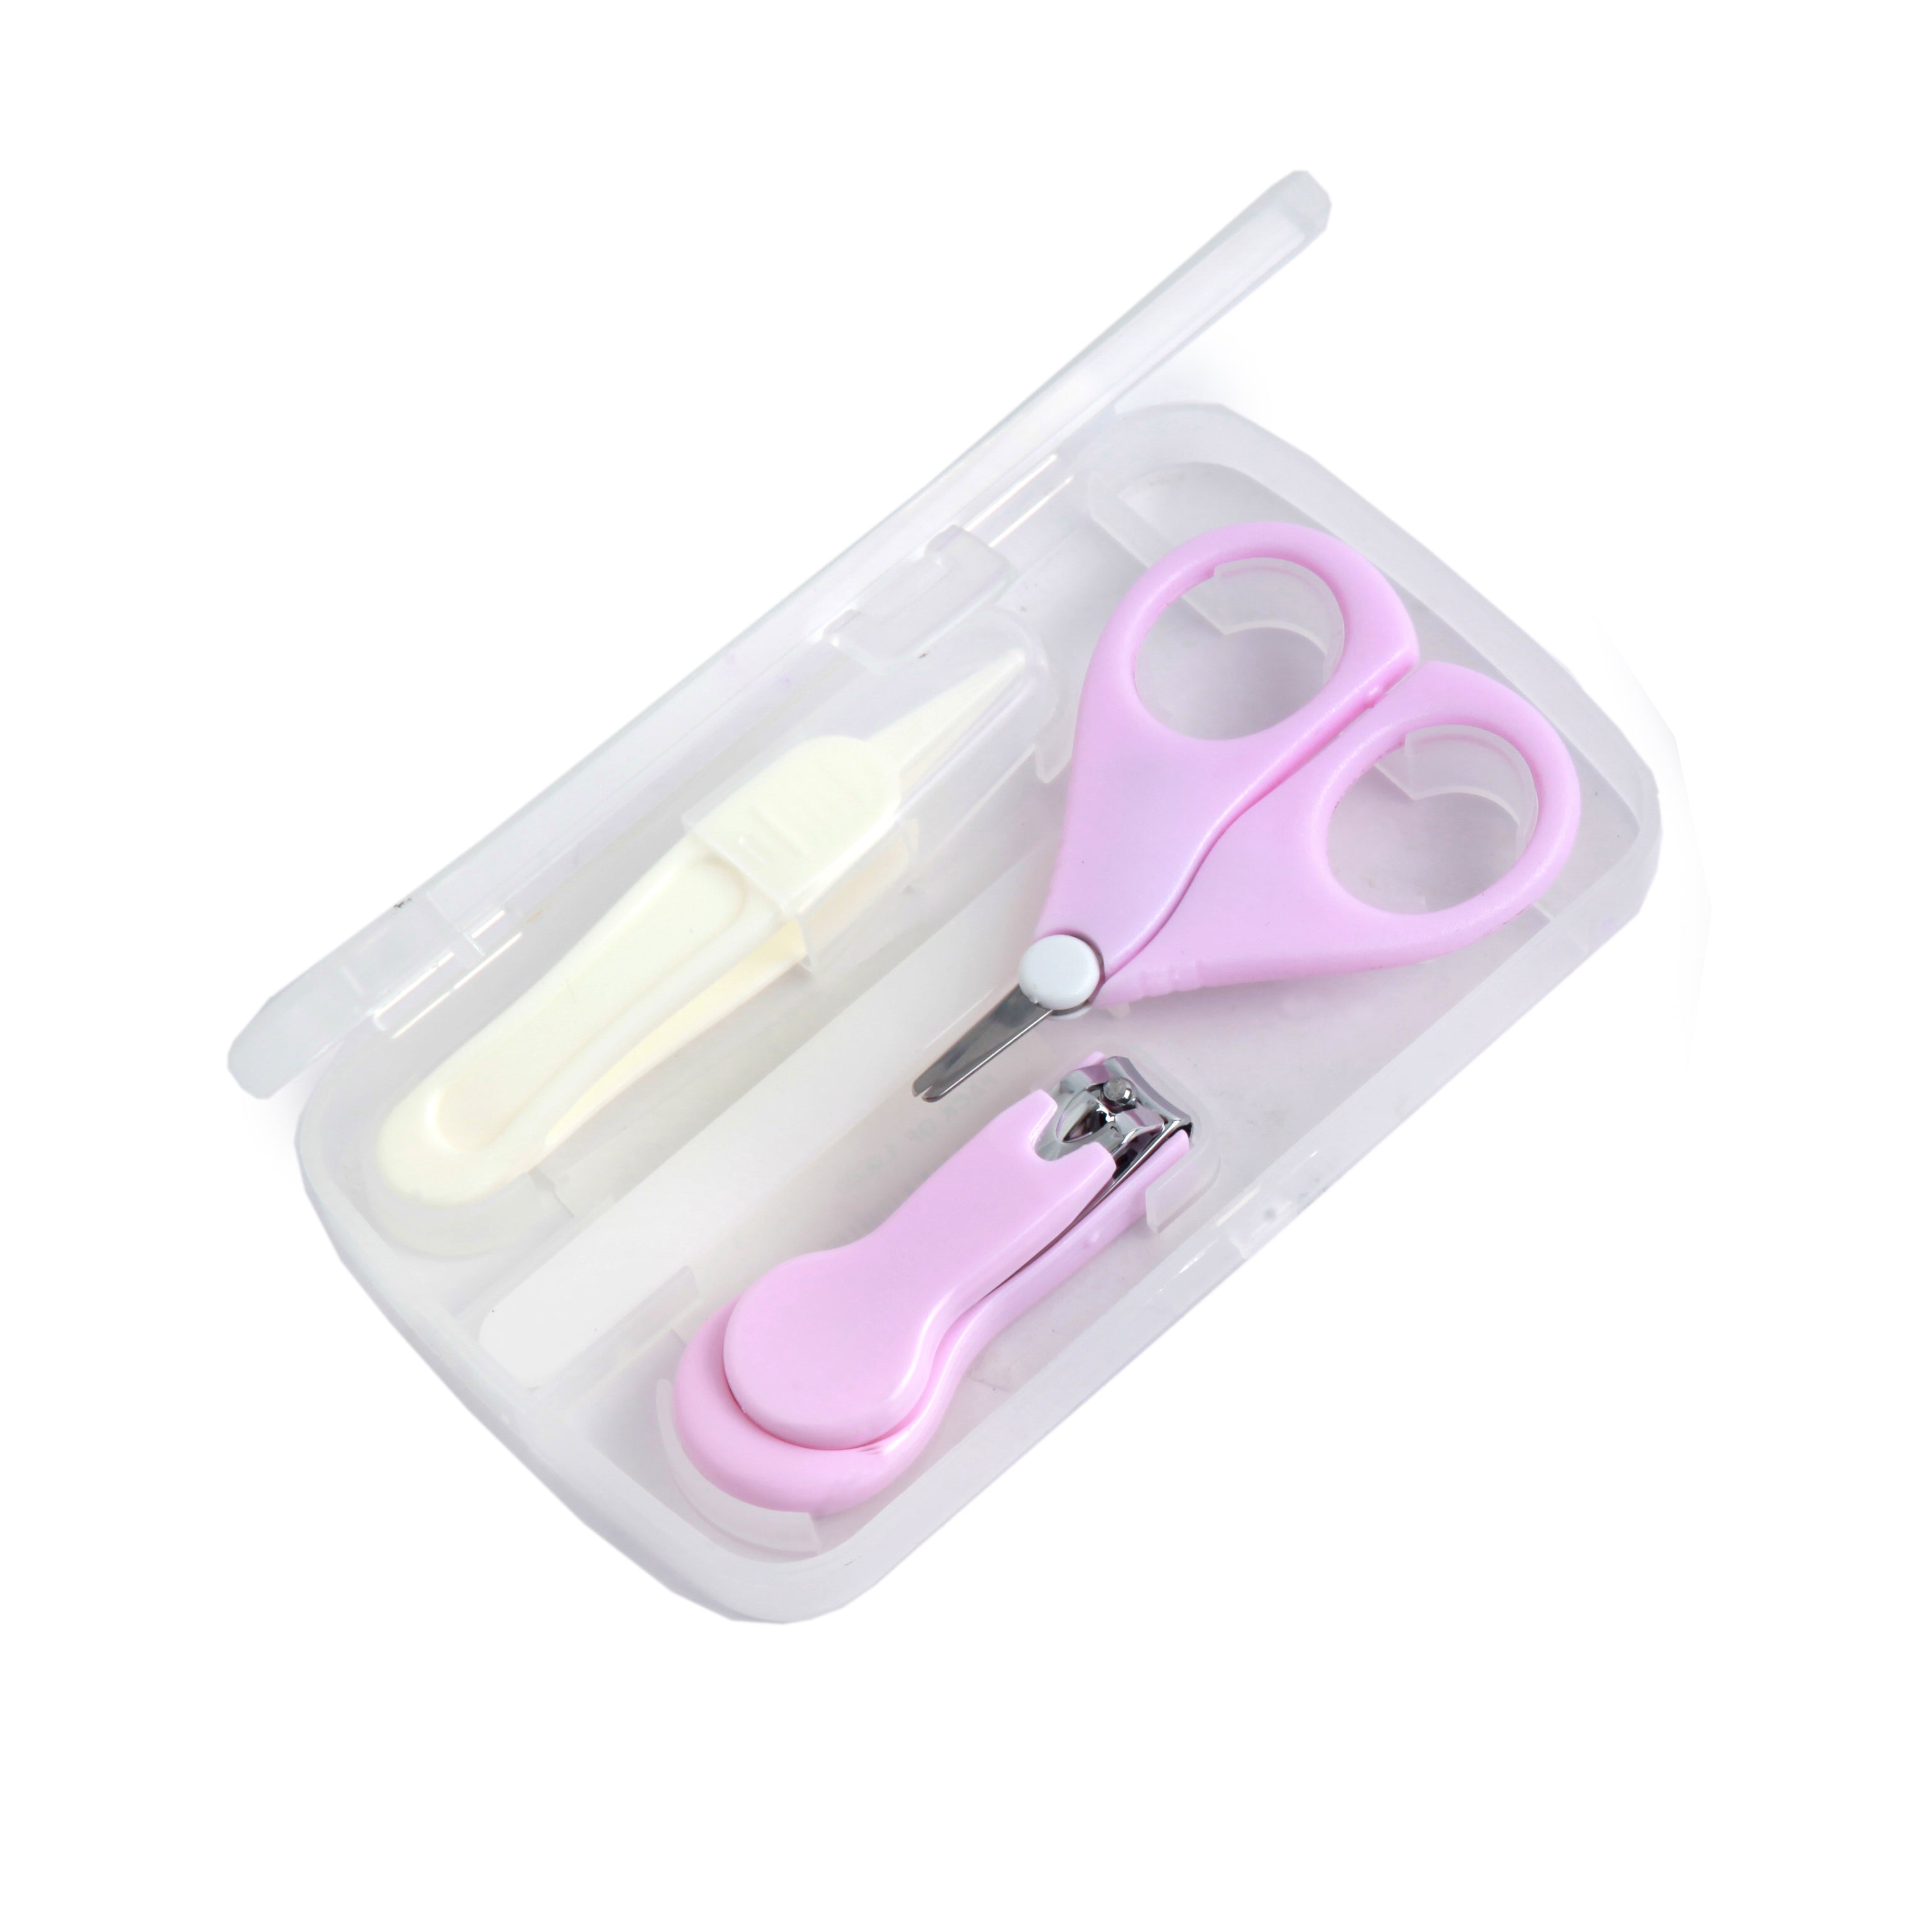 Buy Wolpin Baby Nail Trimmer Grooming Scissors & Nail Clipper Set/Kit,  Manicure (Set of 4 Pcs) with Box, Pink Kids Nail Cutter Online at Low  Prices in India - Amazon.in